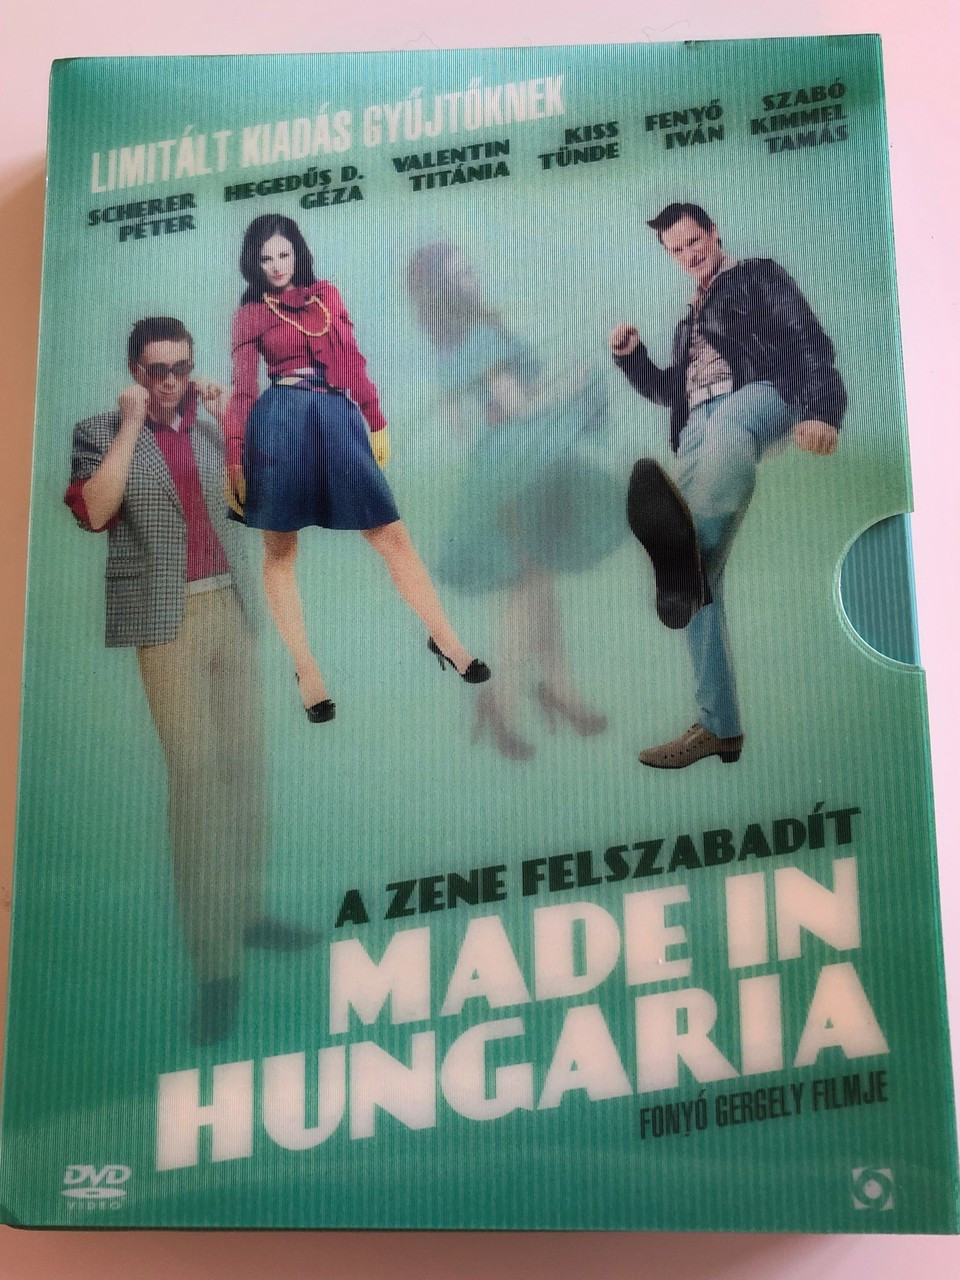 Made in Hungaria DVD 2009 Collector's Limited Edition Disc set / Directed  by Gergely Fonyó / Starring: Tamás Szabó Kimmel, Tünde Kiss, Iván Fenyő / 2  DVDs + Audio CD with OST - bibleinmylanguage